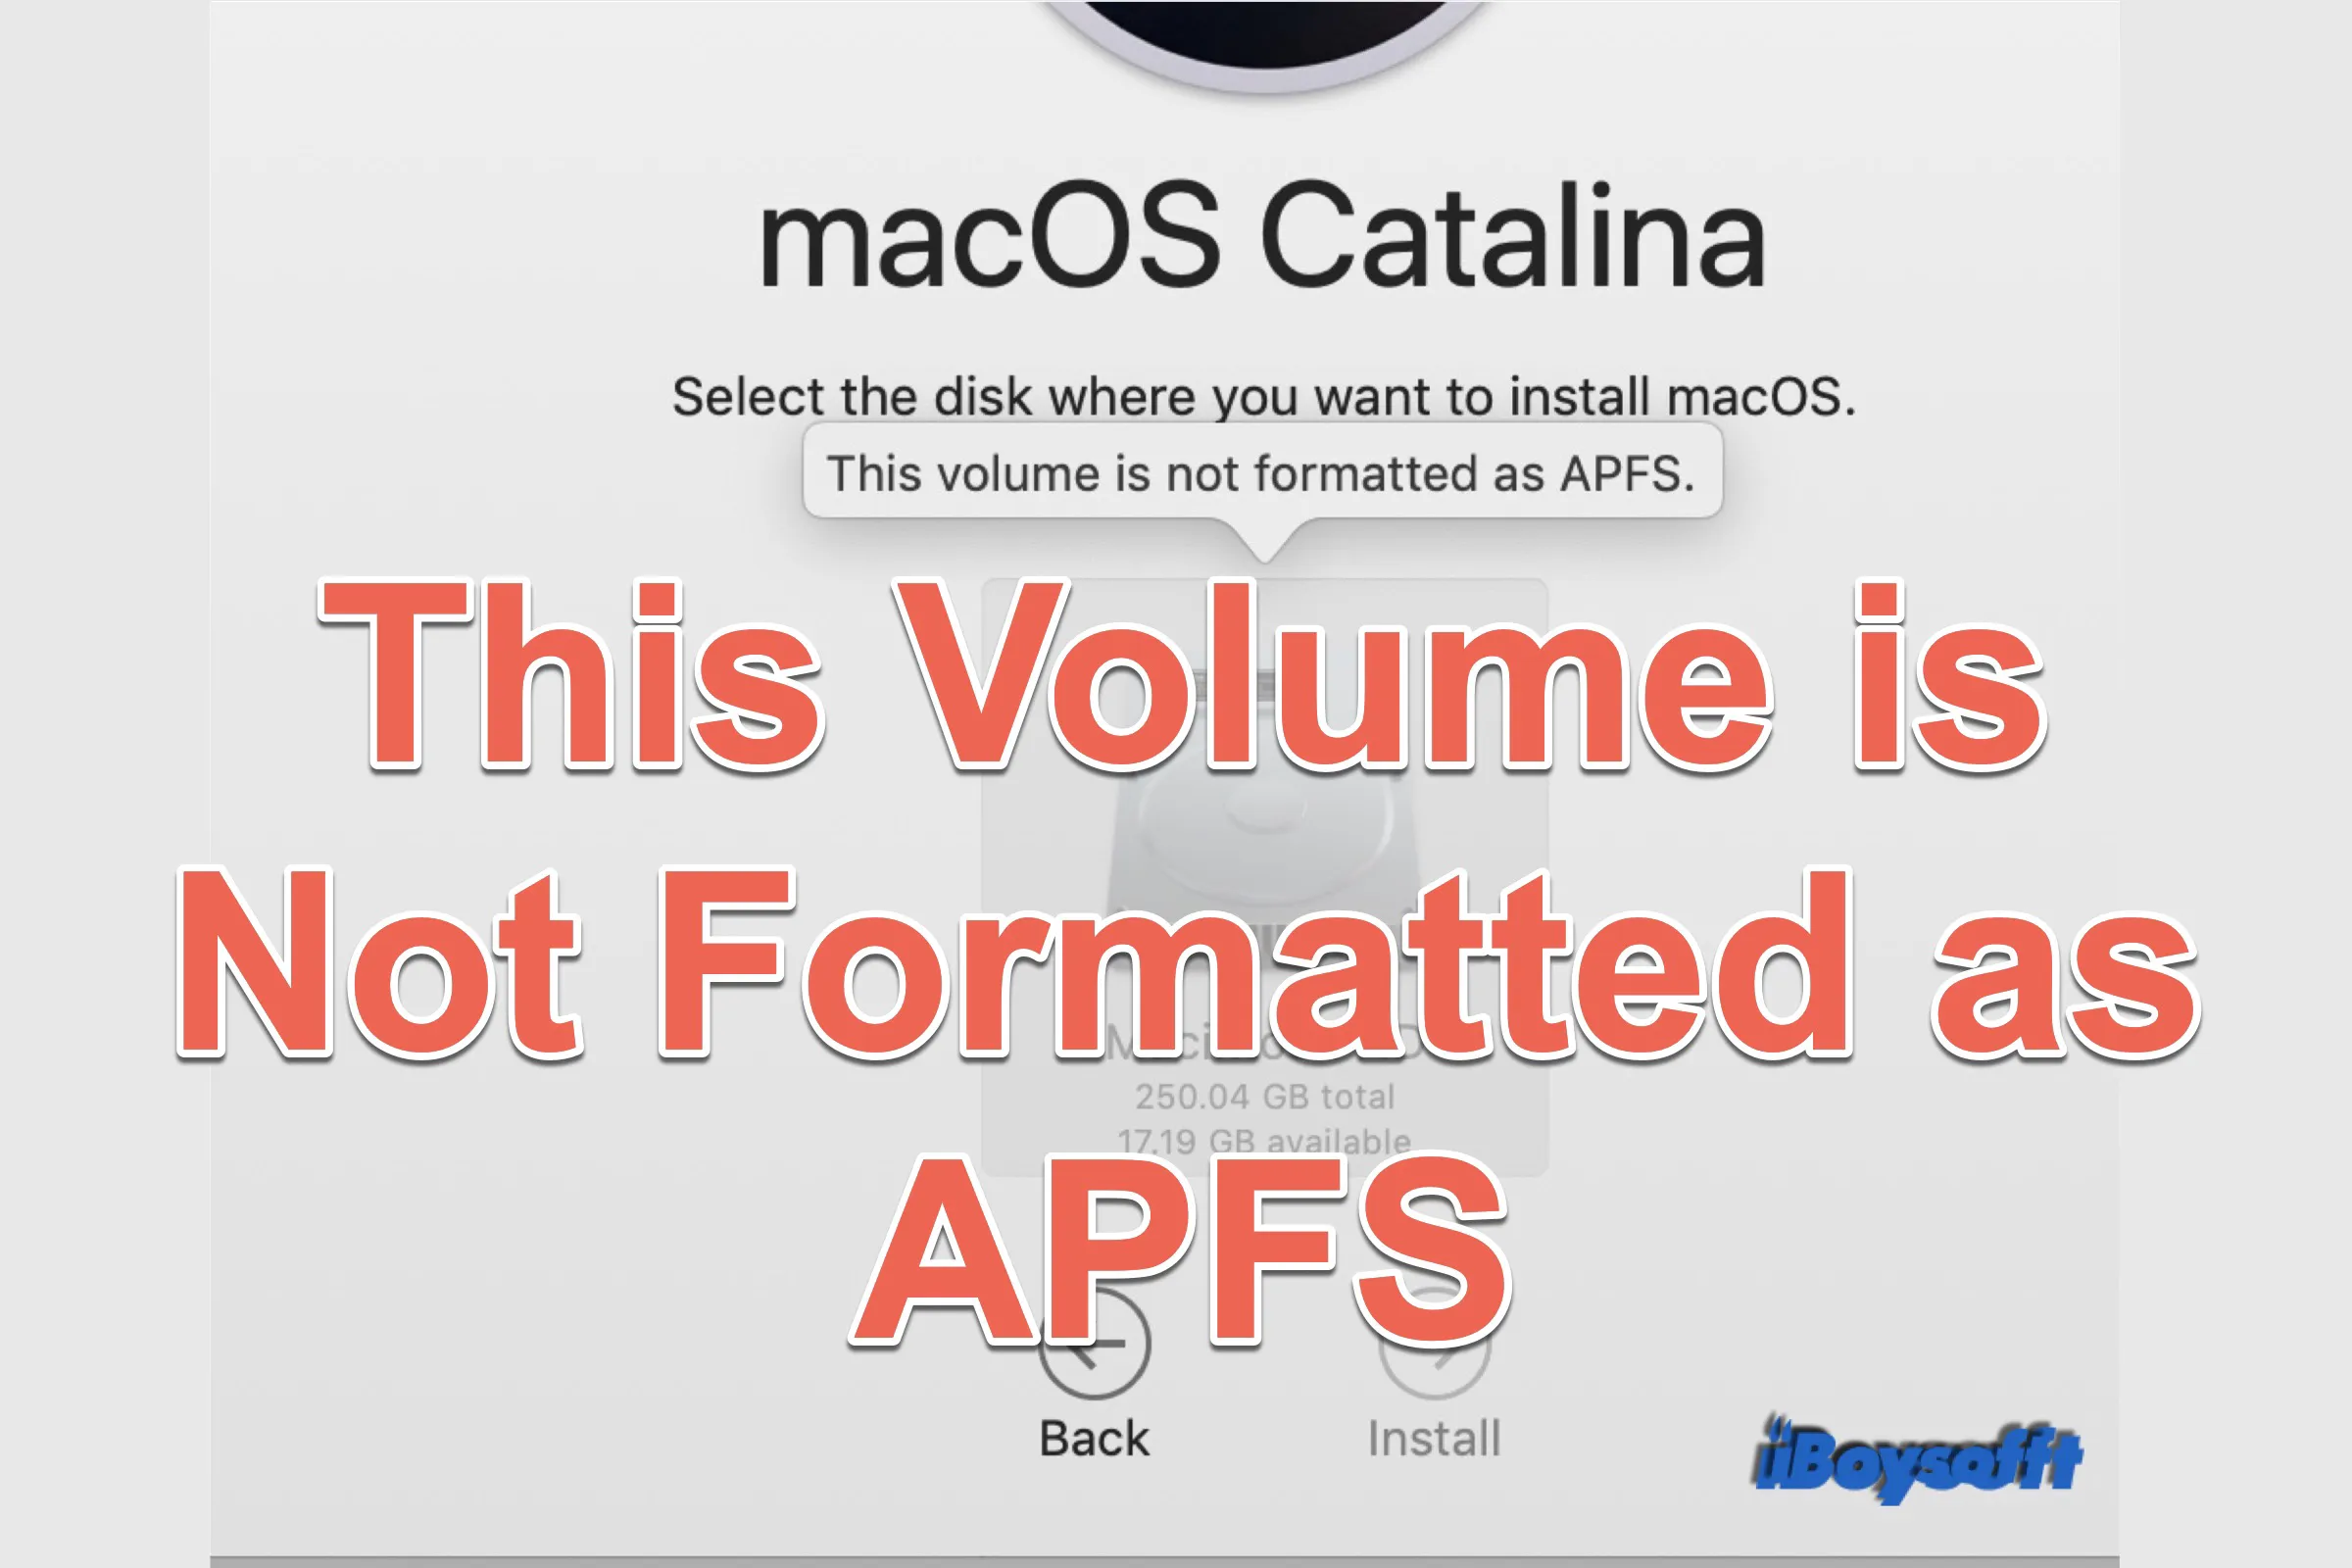 this volume is not formatted as APFS